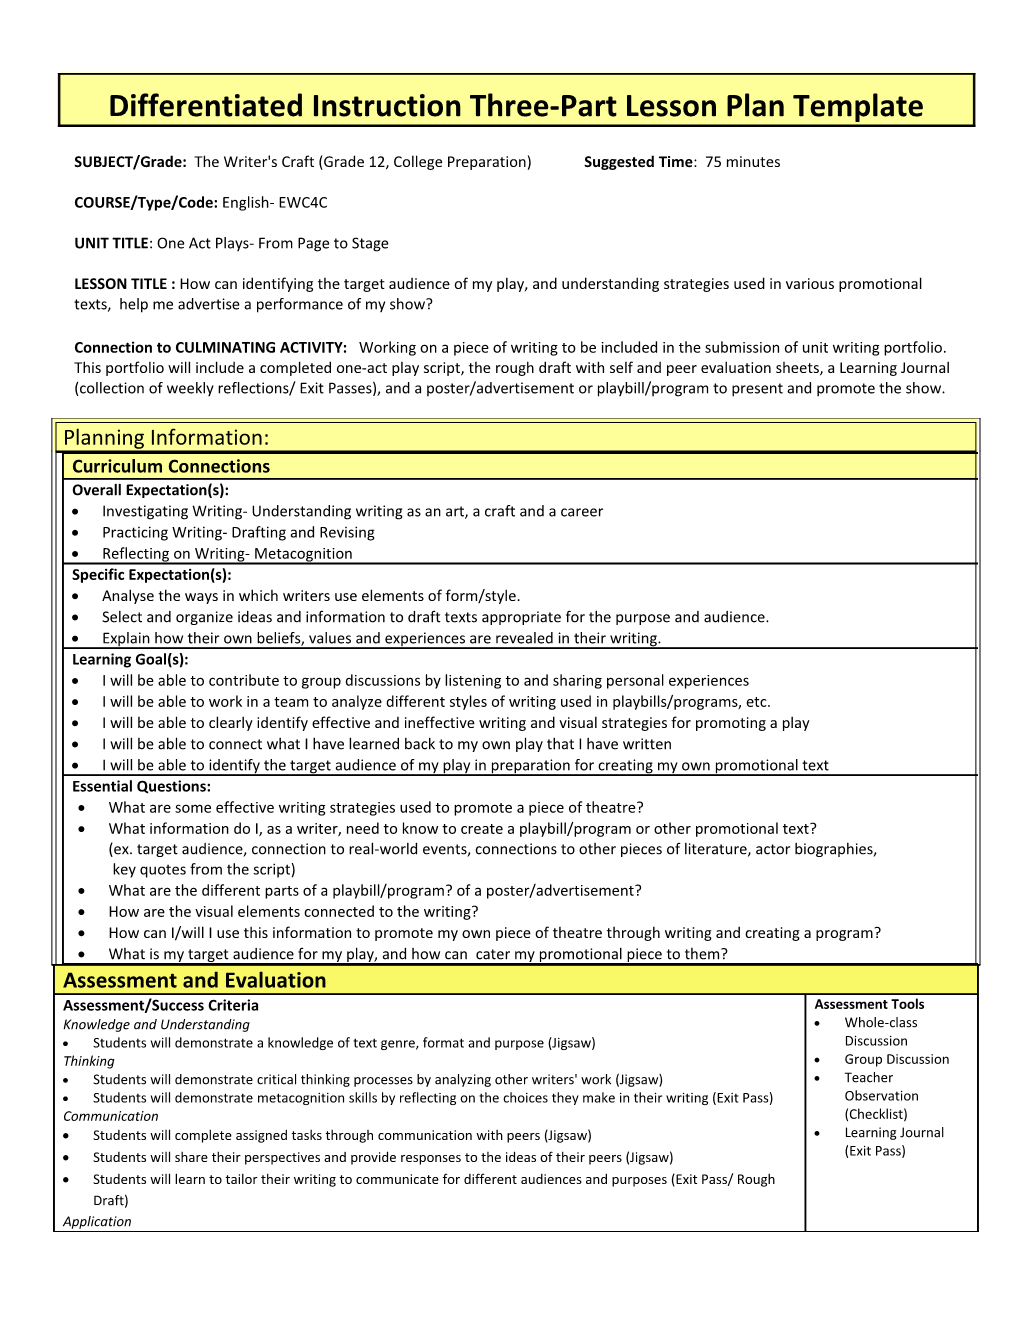 Lesson Plan Template s14